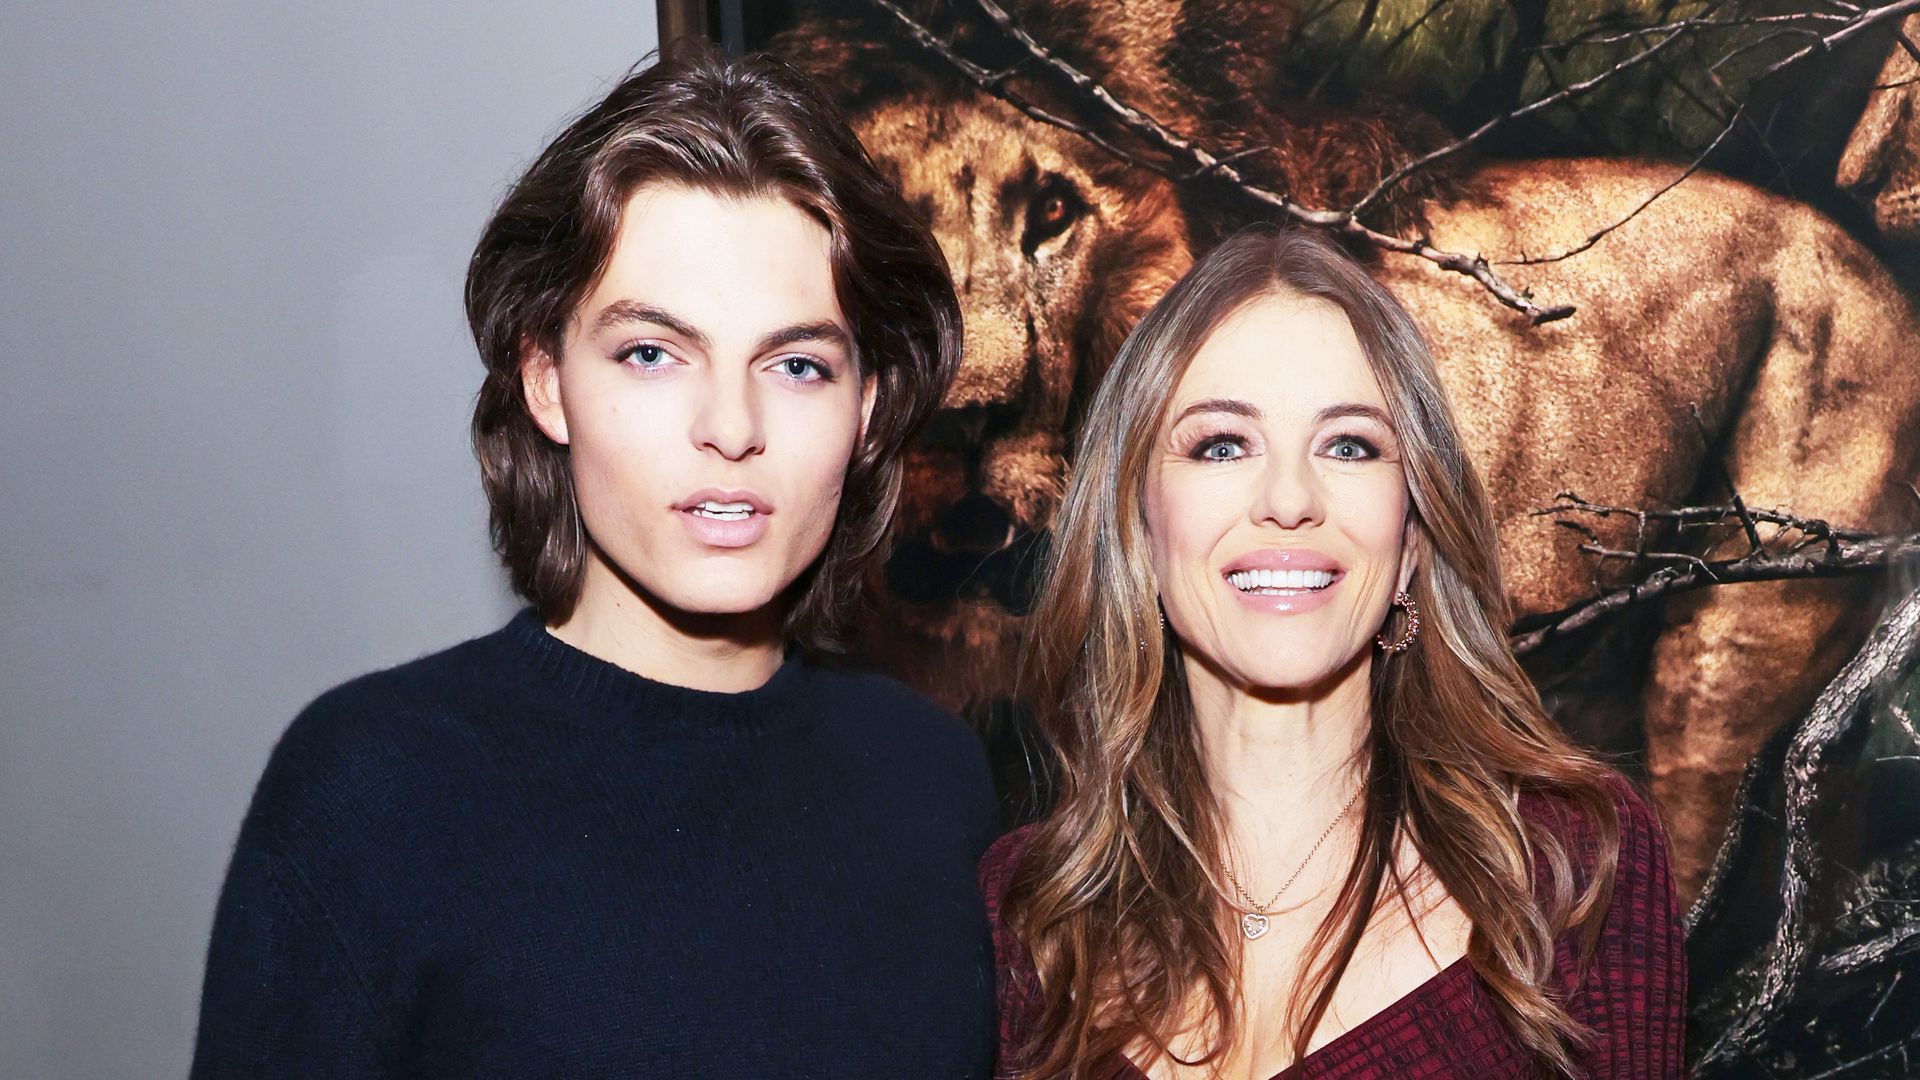 Elizabeth Hurley and her lookalike son Damian reveal they share each others clothes